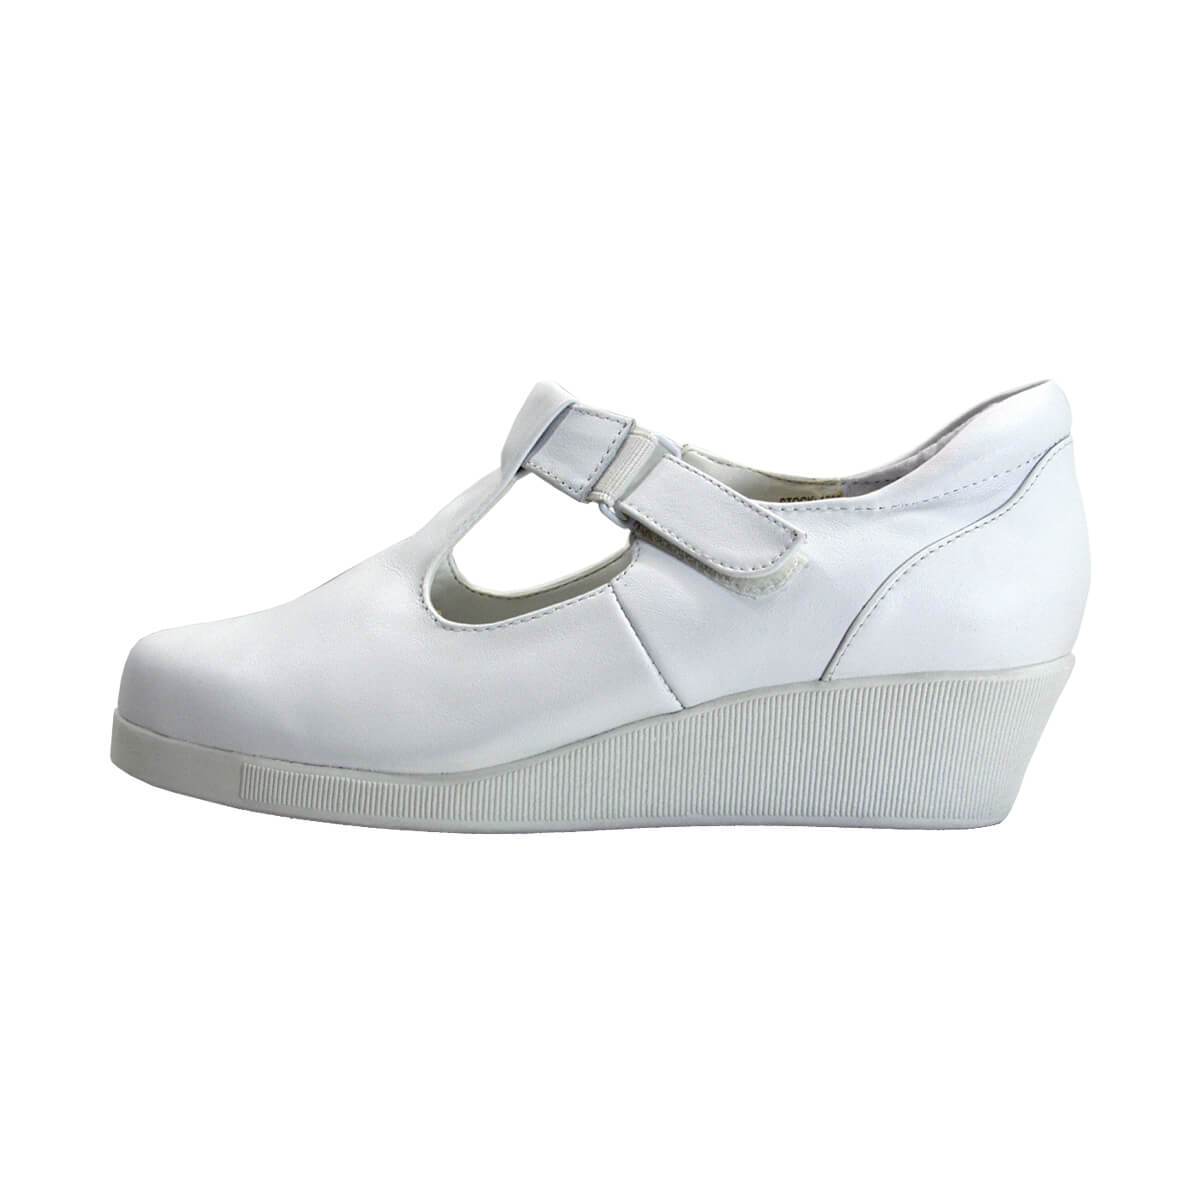 24 HOUR COMFORT Reanne Women's Wide Width T-Strap Leather Shoes